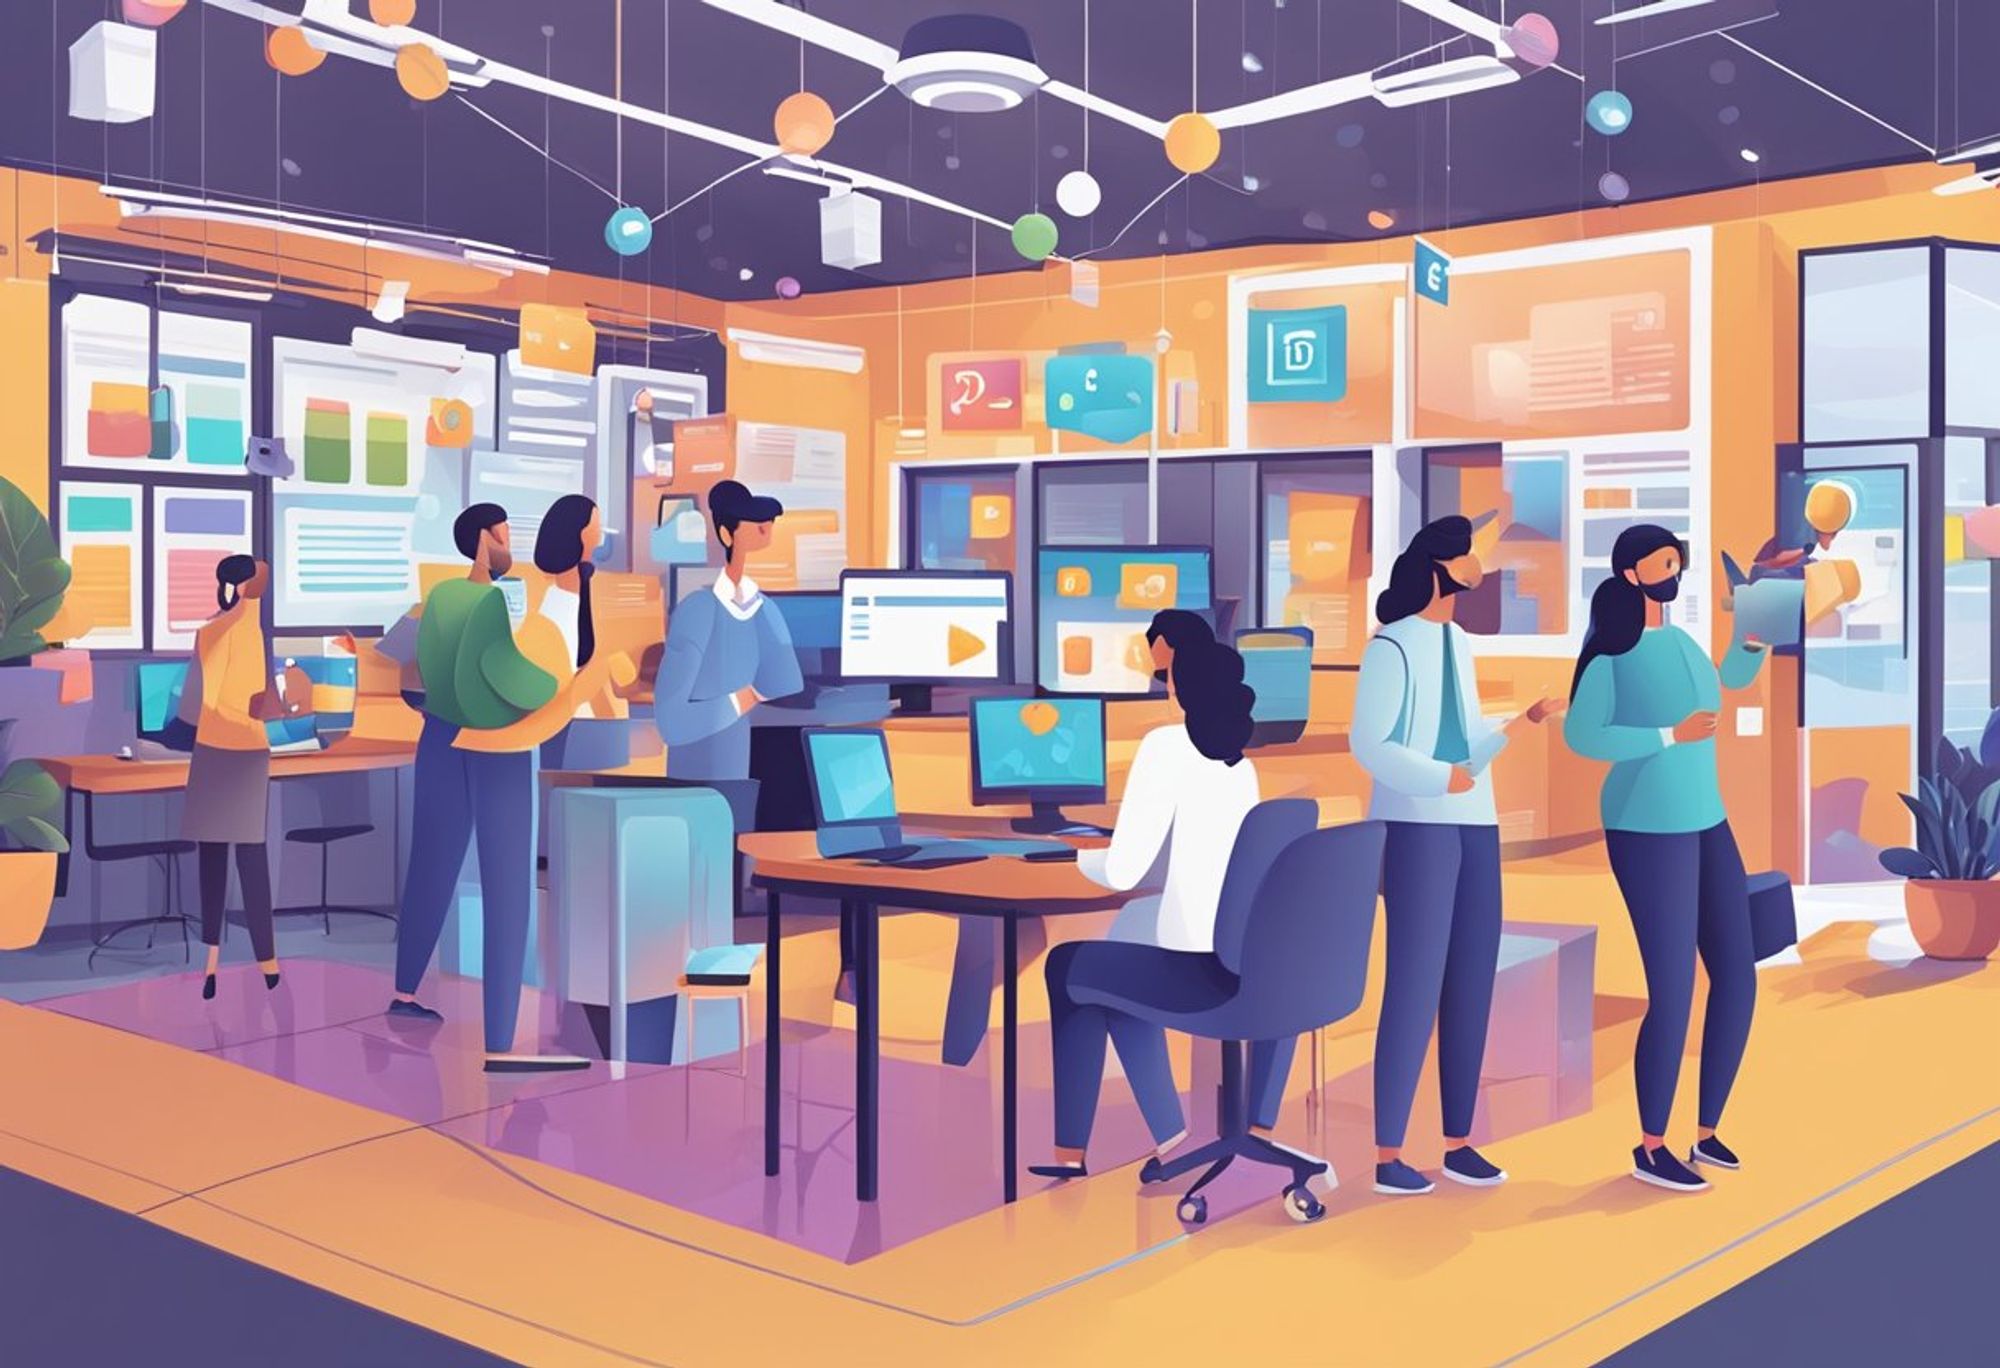 Vibrant illustration of a busy digital marketing office with professionals working on computers and collaborating in a modern workspace, adorned with floating colorful decorations and interactive displays, emphasizing teamwork in social media strategy development.